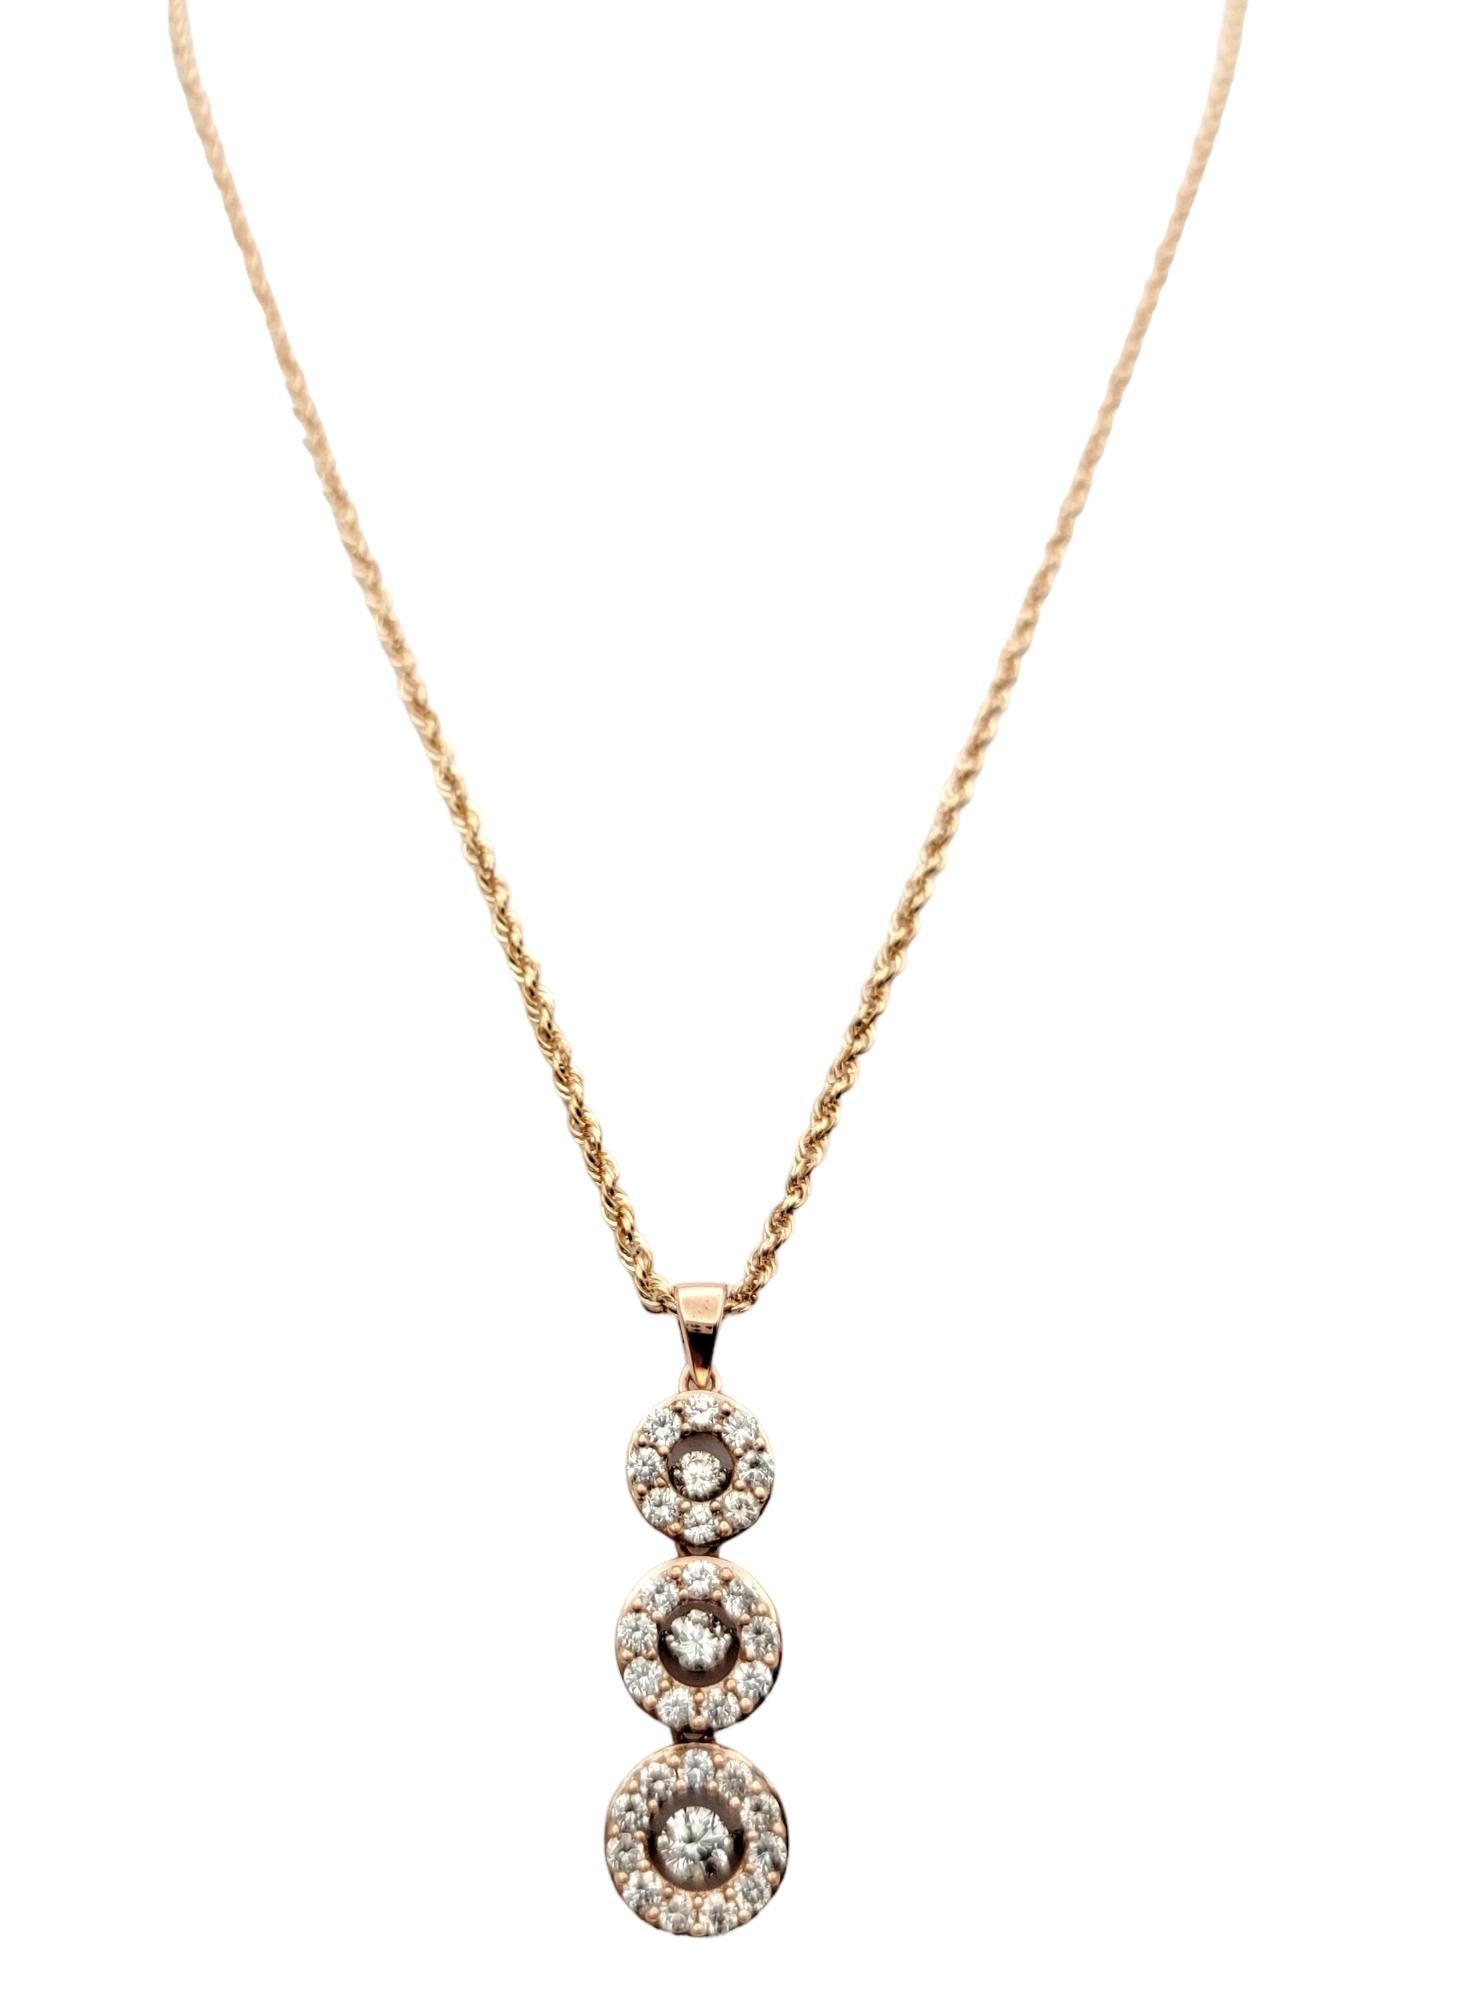 You will simply adore this gorgeous contemporary diamond pendant necklace.  Warm rose gold is paired with sparkling white diamonds in a chic modern design, making this glittering beauty one of your new favorite pieces. 

This lovely necklace